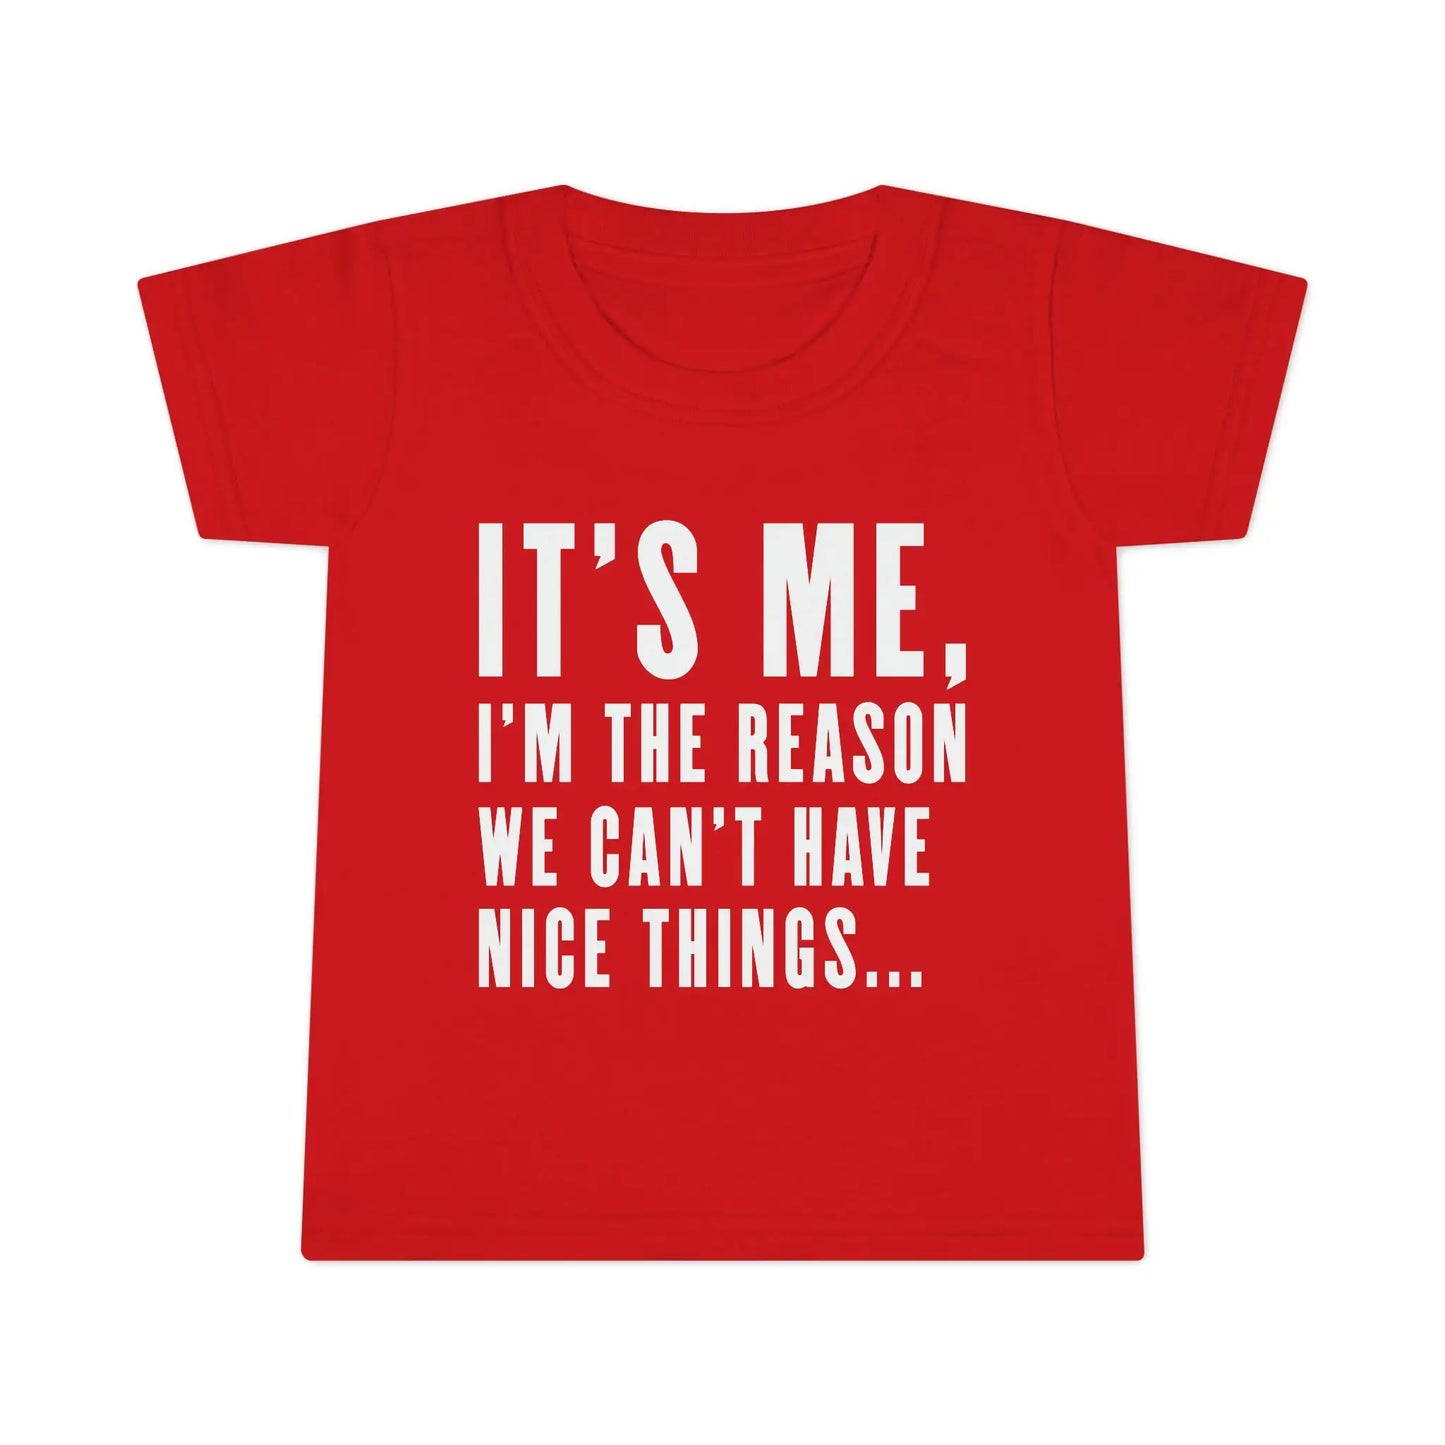 Can't Have Nice Things Toddler T-shirt - Wicked Tees